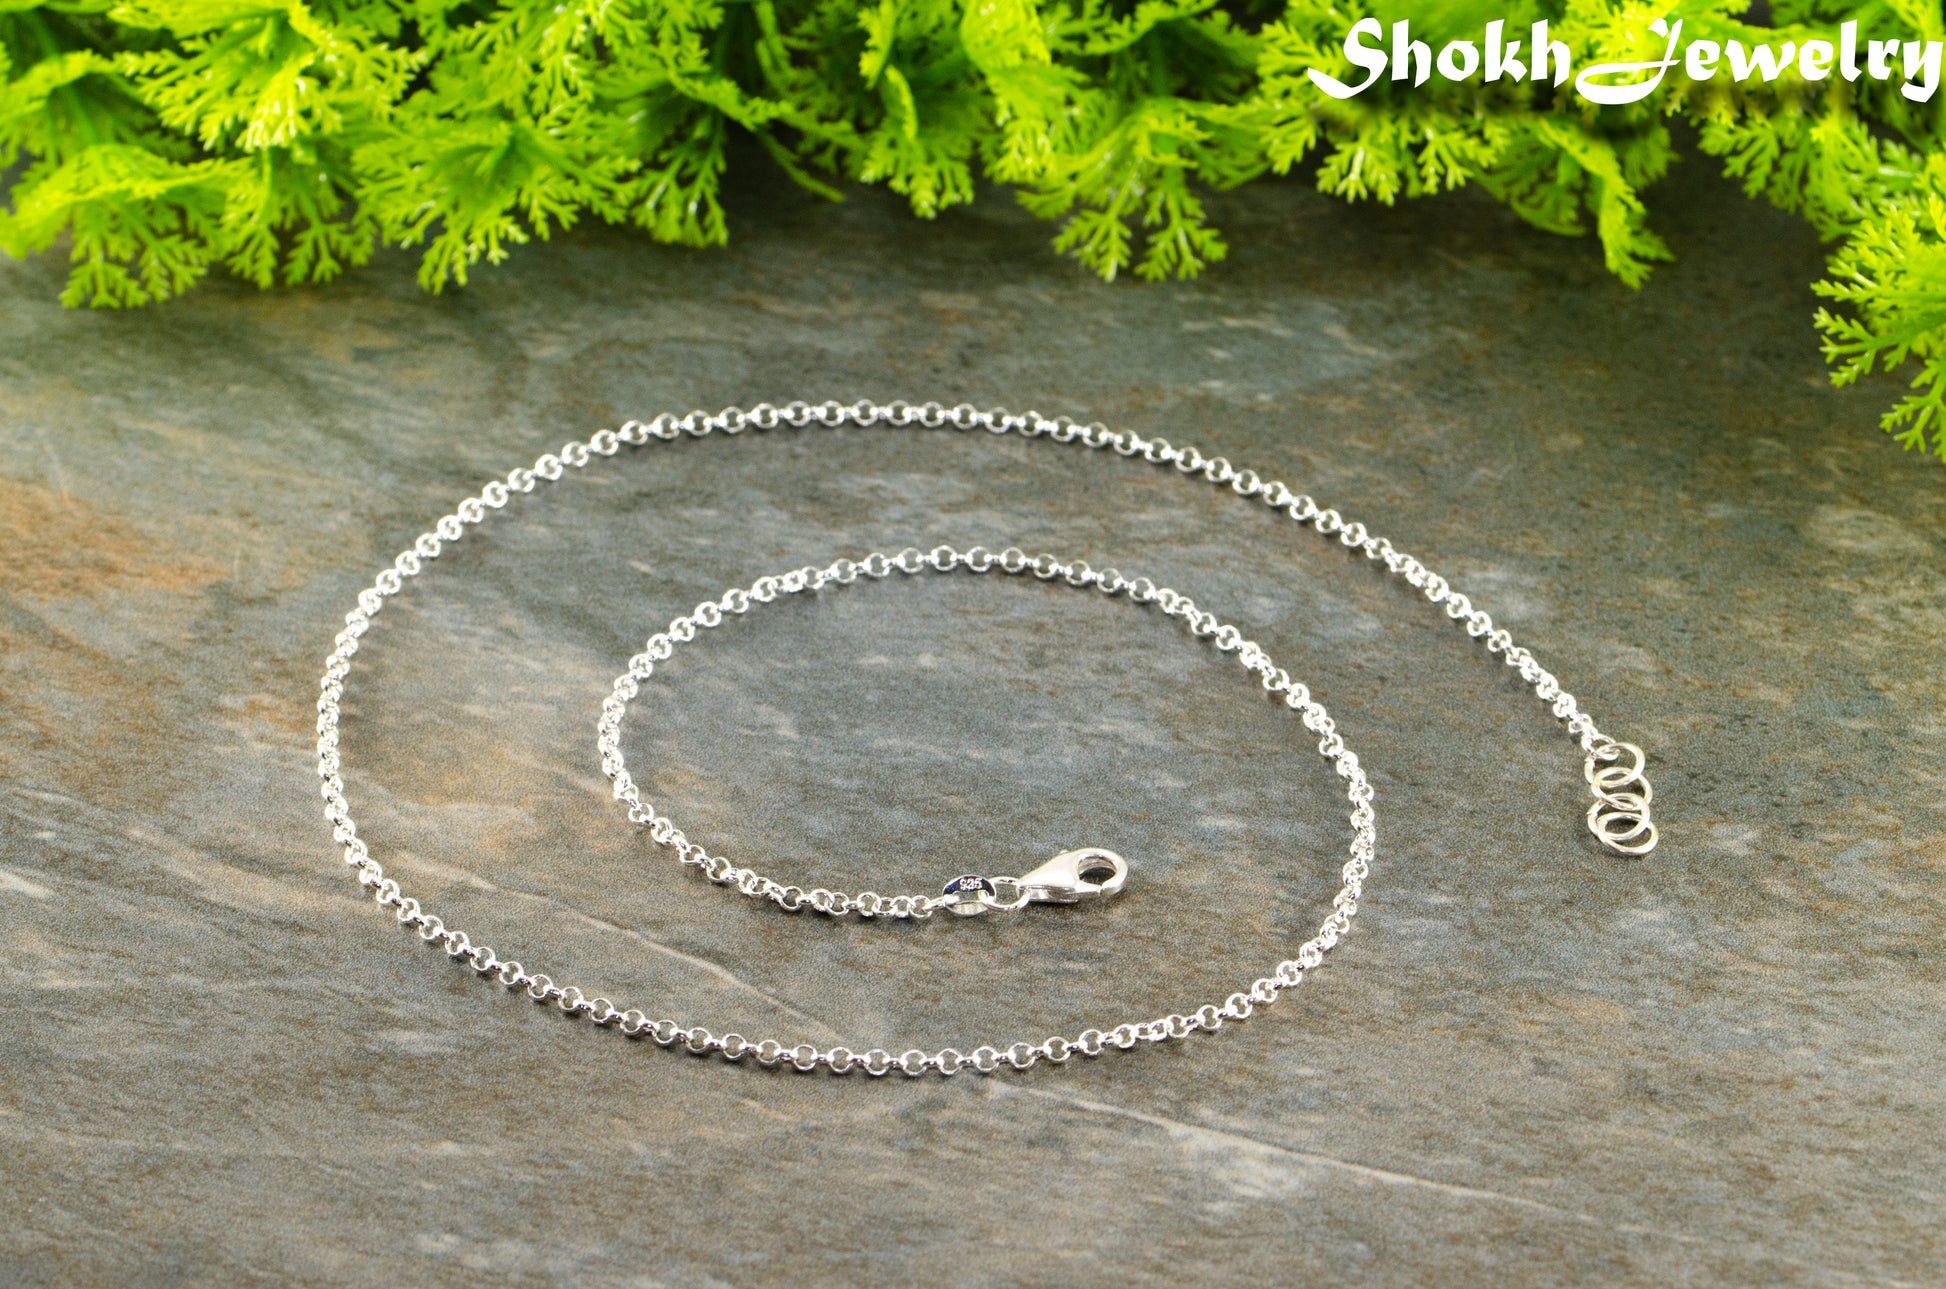 2.5mm Silver Plated Dainty Chain Choker Necklace with clasp.